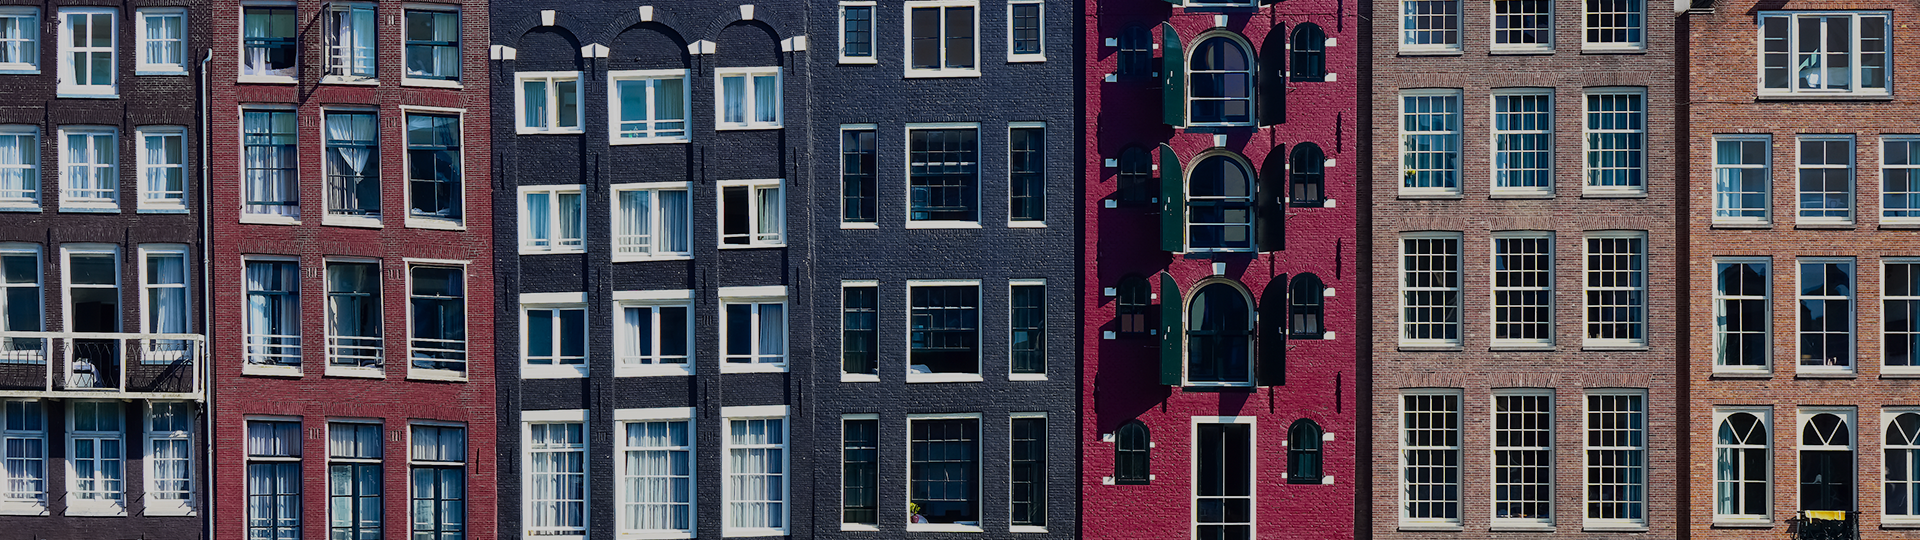 Houses along canals in Amsterdam.